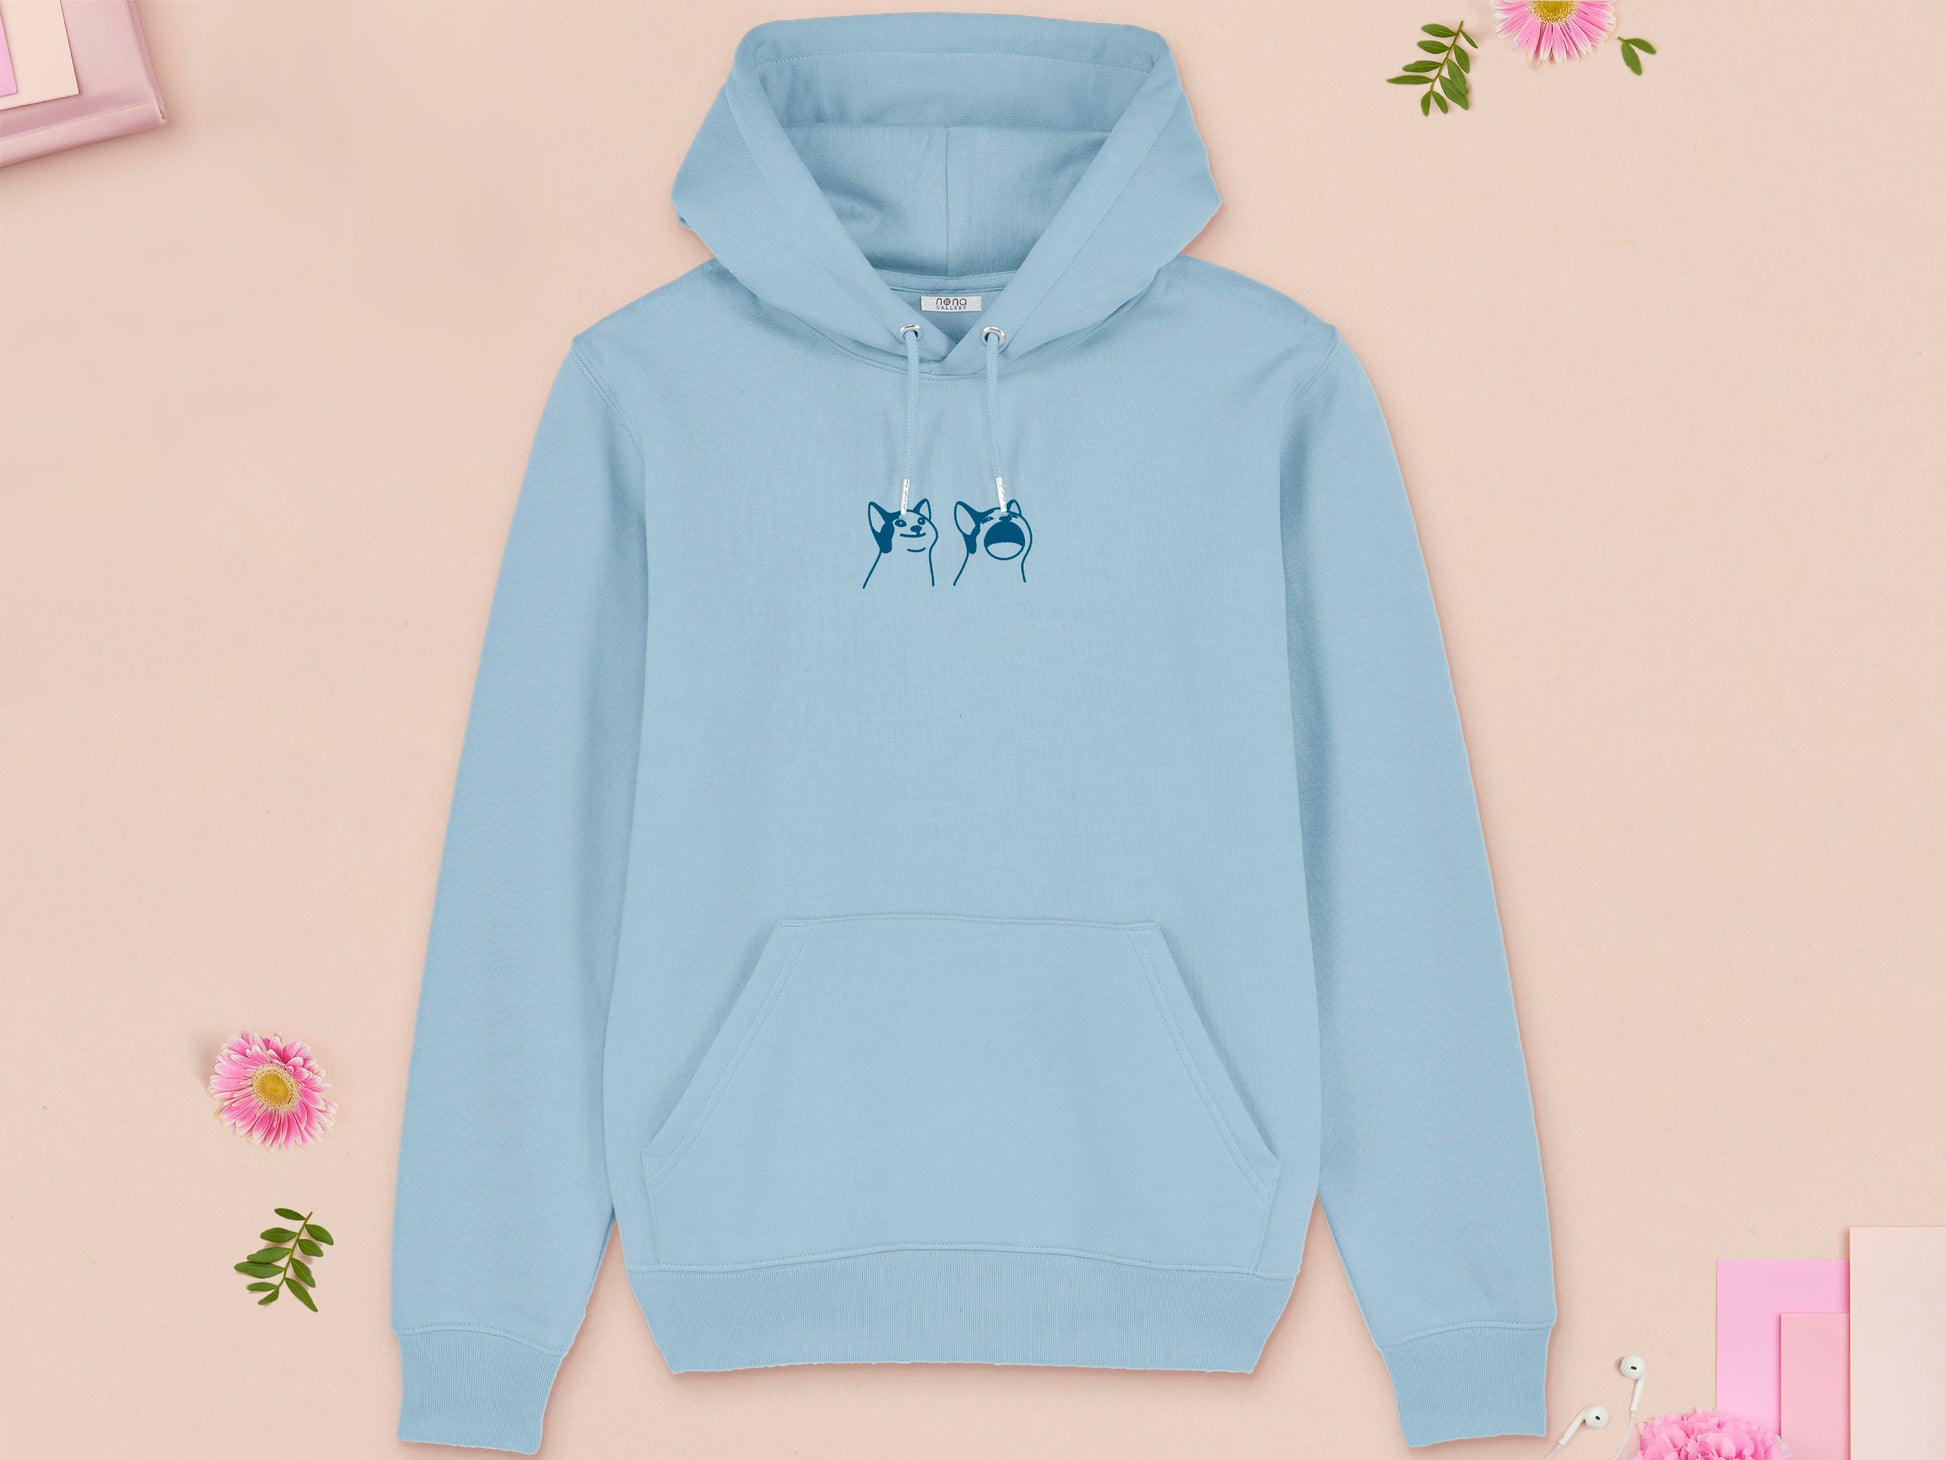 A blue long sleeved fleece hoodie, with an embroidered blue thread design of a cute popcat the cat meme reaction twitch emote